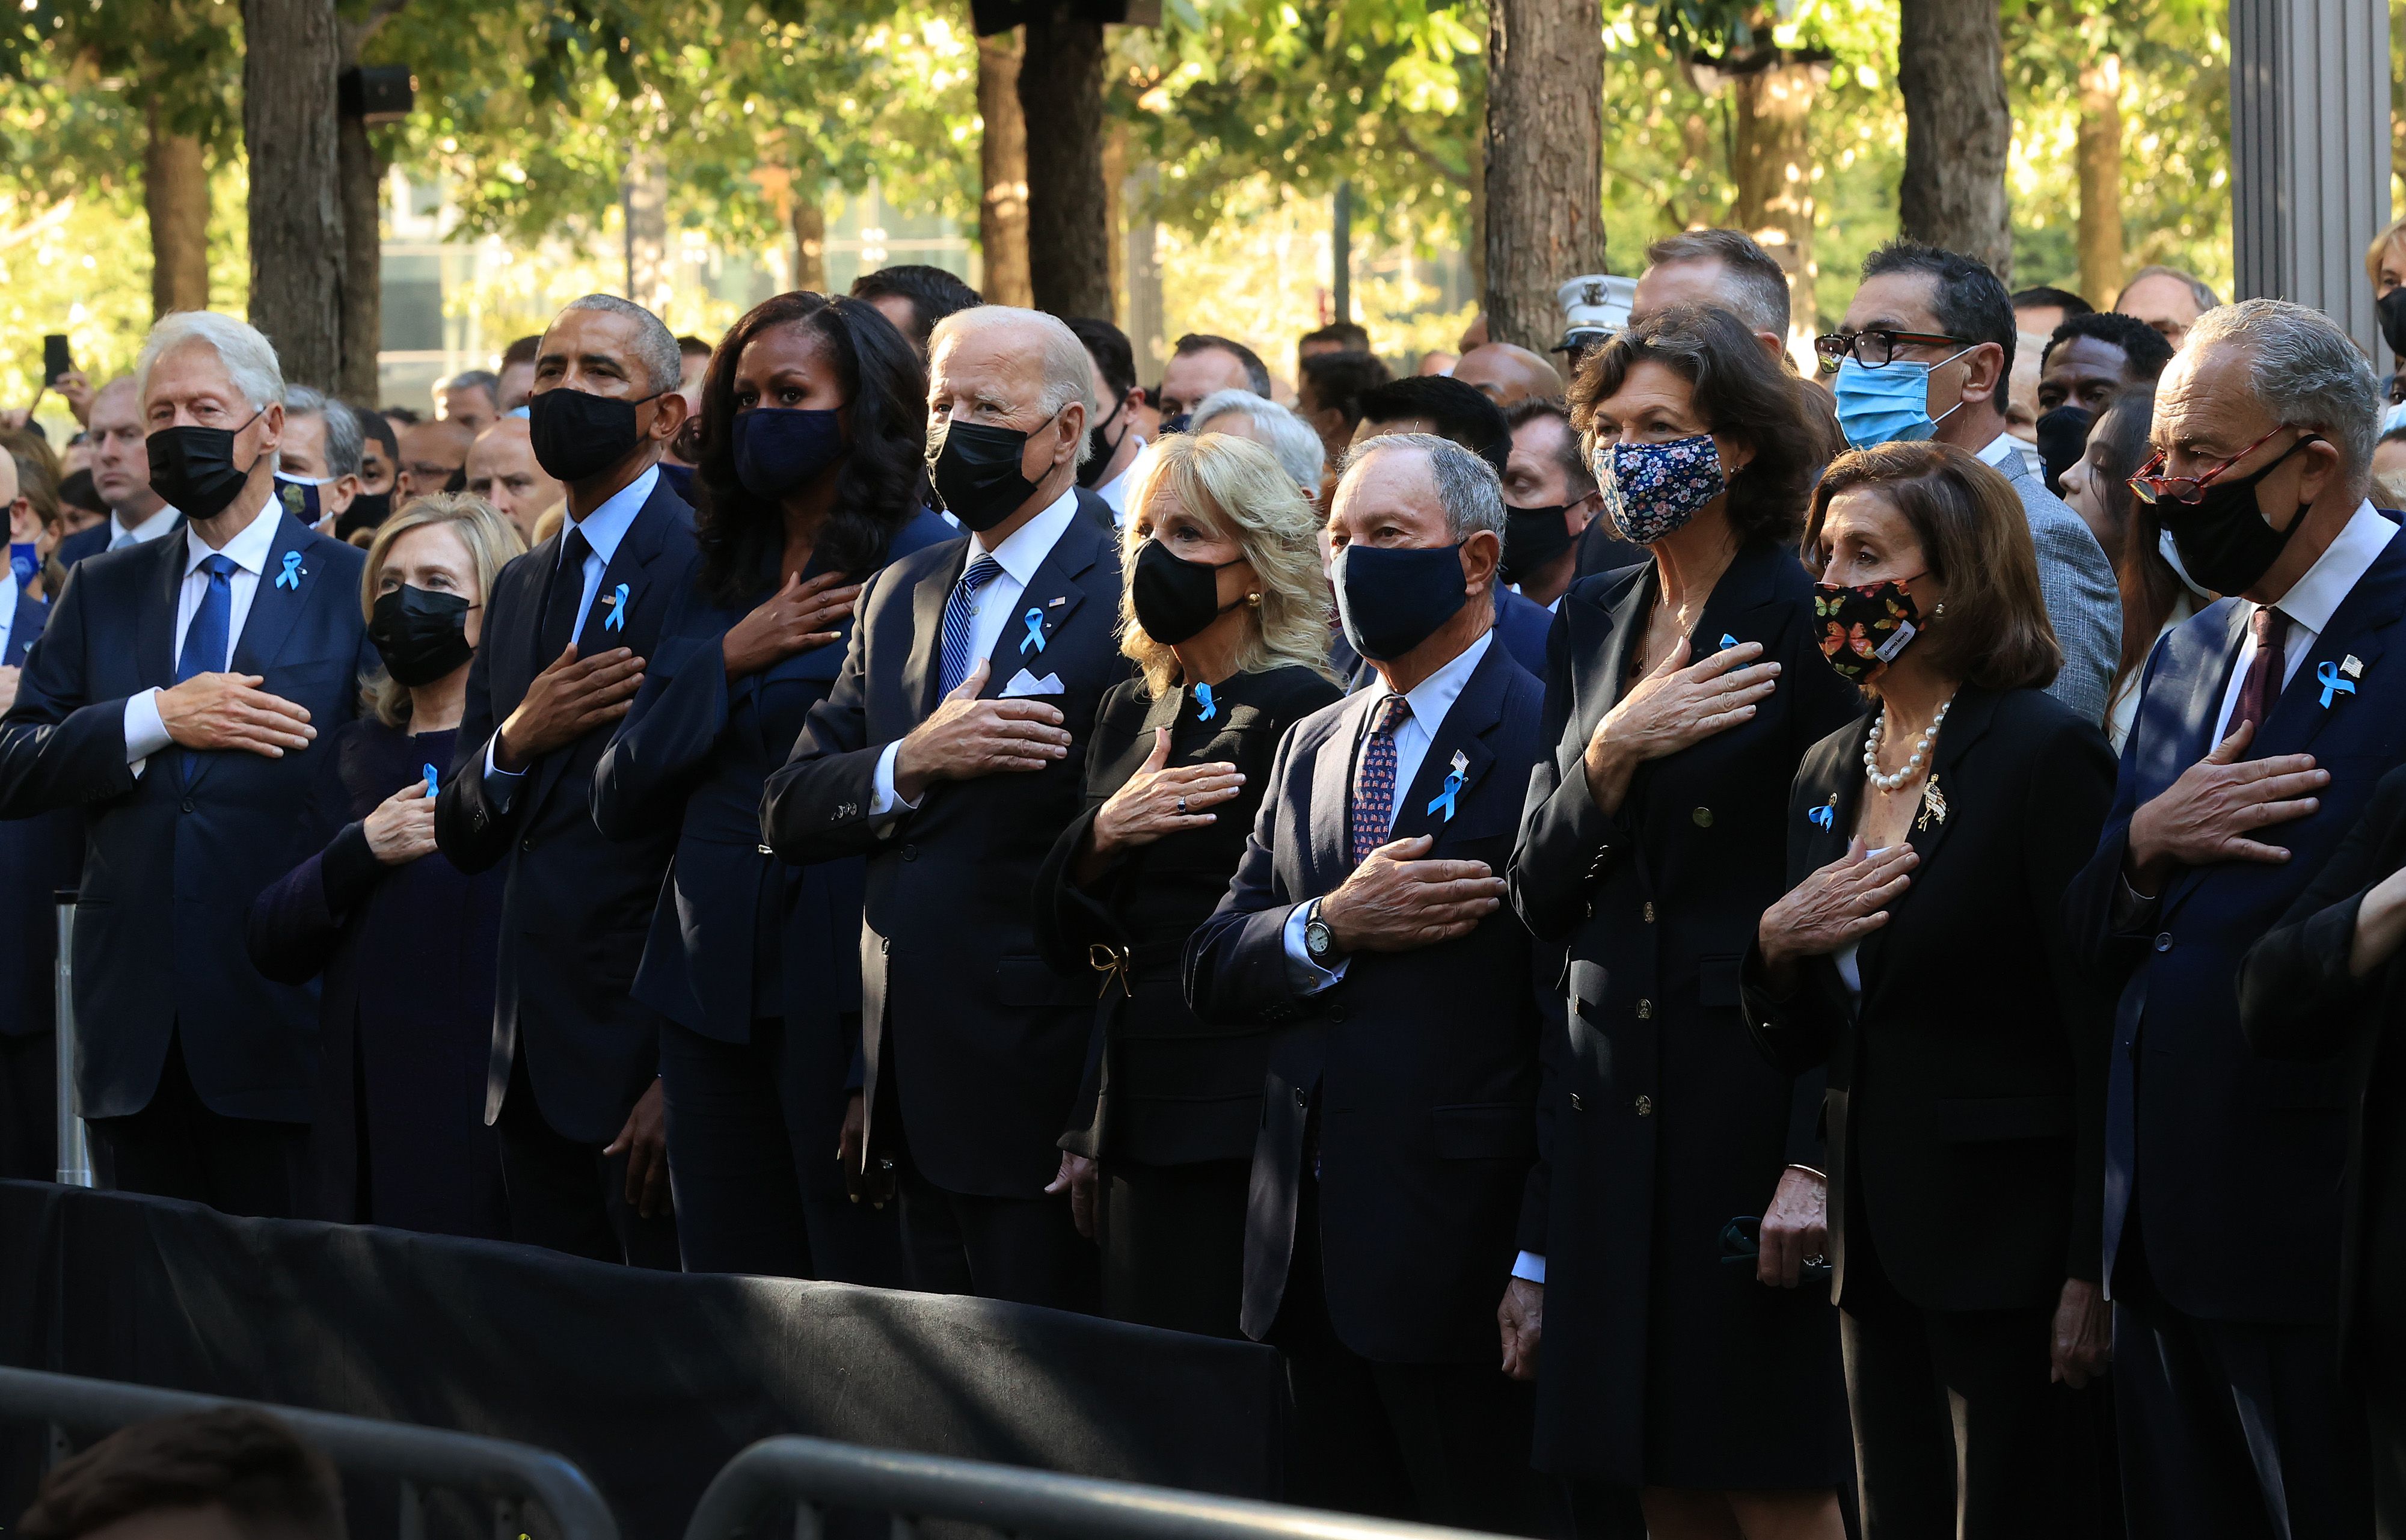 President Biden and first lady Jill are joined by former presidents at the 9/11 Commemoration Ceremony.